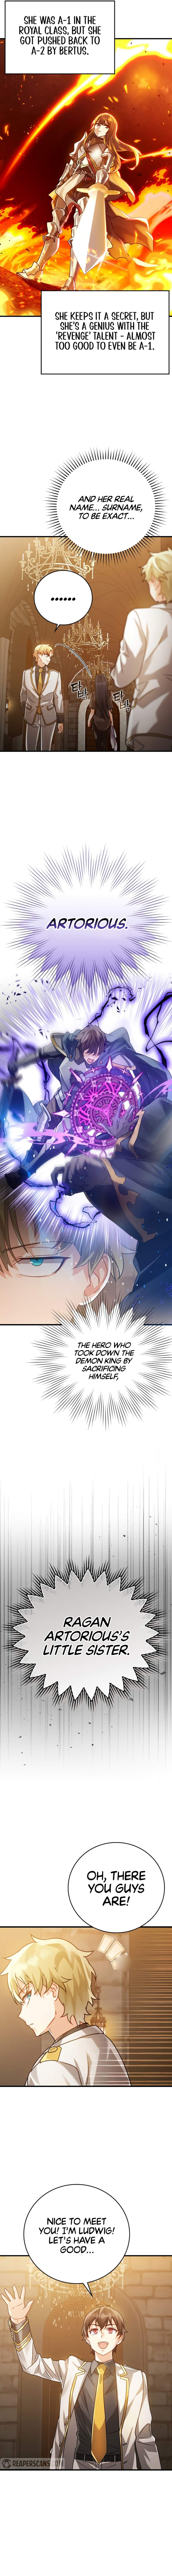 The Demon Prince goes to the Academy Chapter 13-eng-li - Page 10